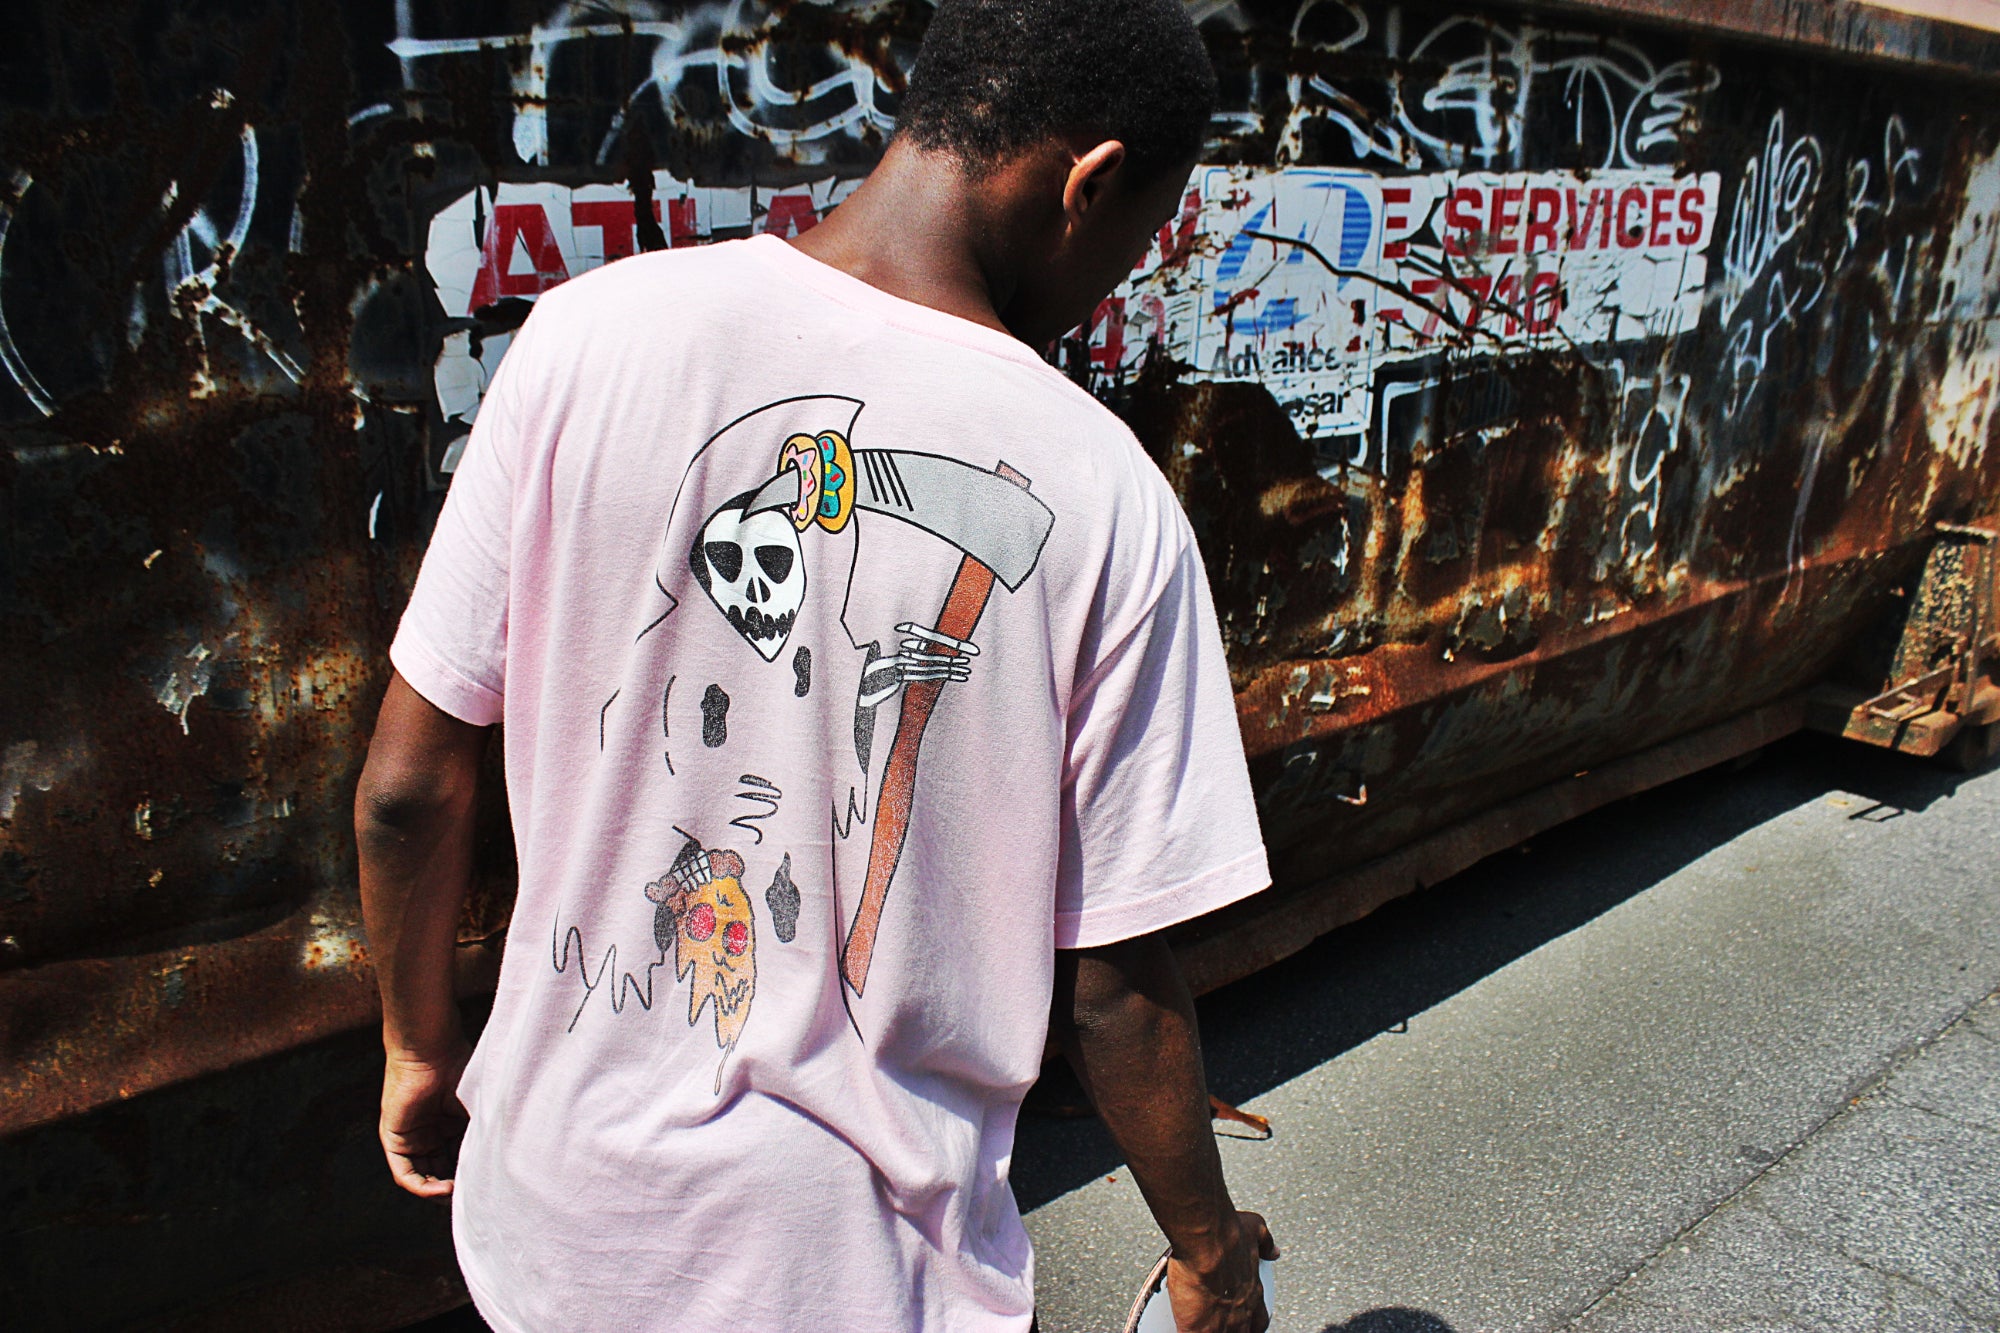 A young person photographed from behind wears a graphic tee and skates in an alley